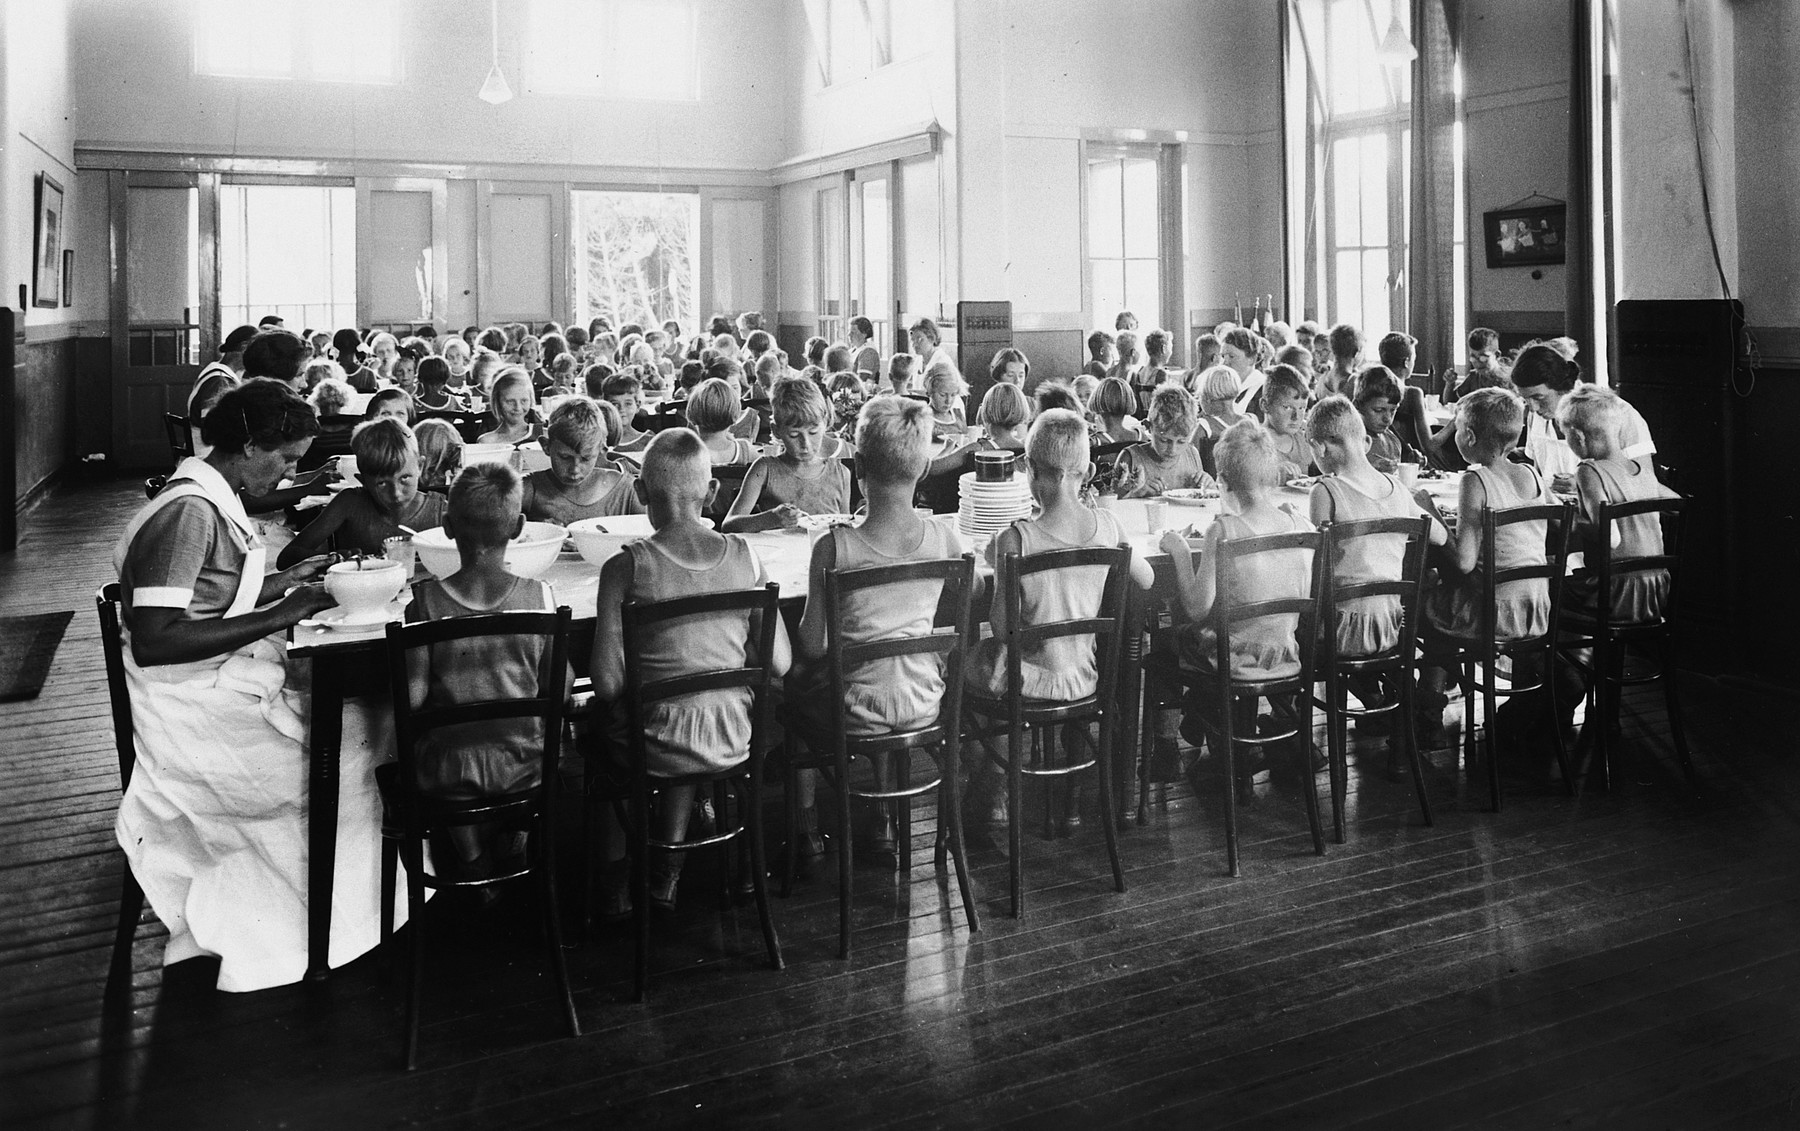 Children eating in the dining hall at the children's home referred to as the "Zeehuis" (Sea house) in Bergen aan Zee.